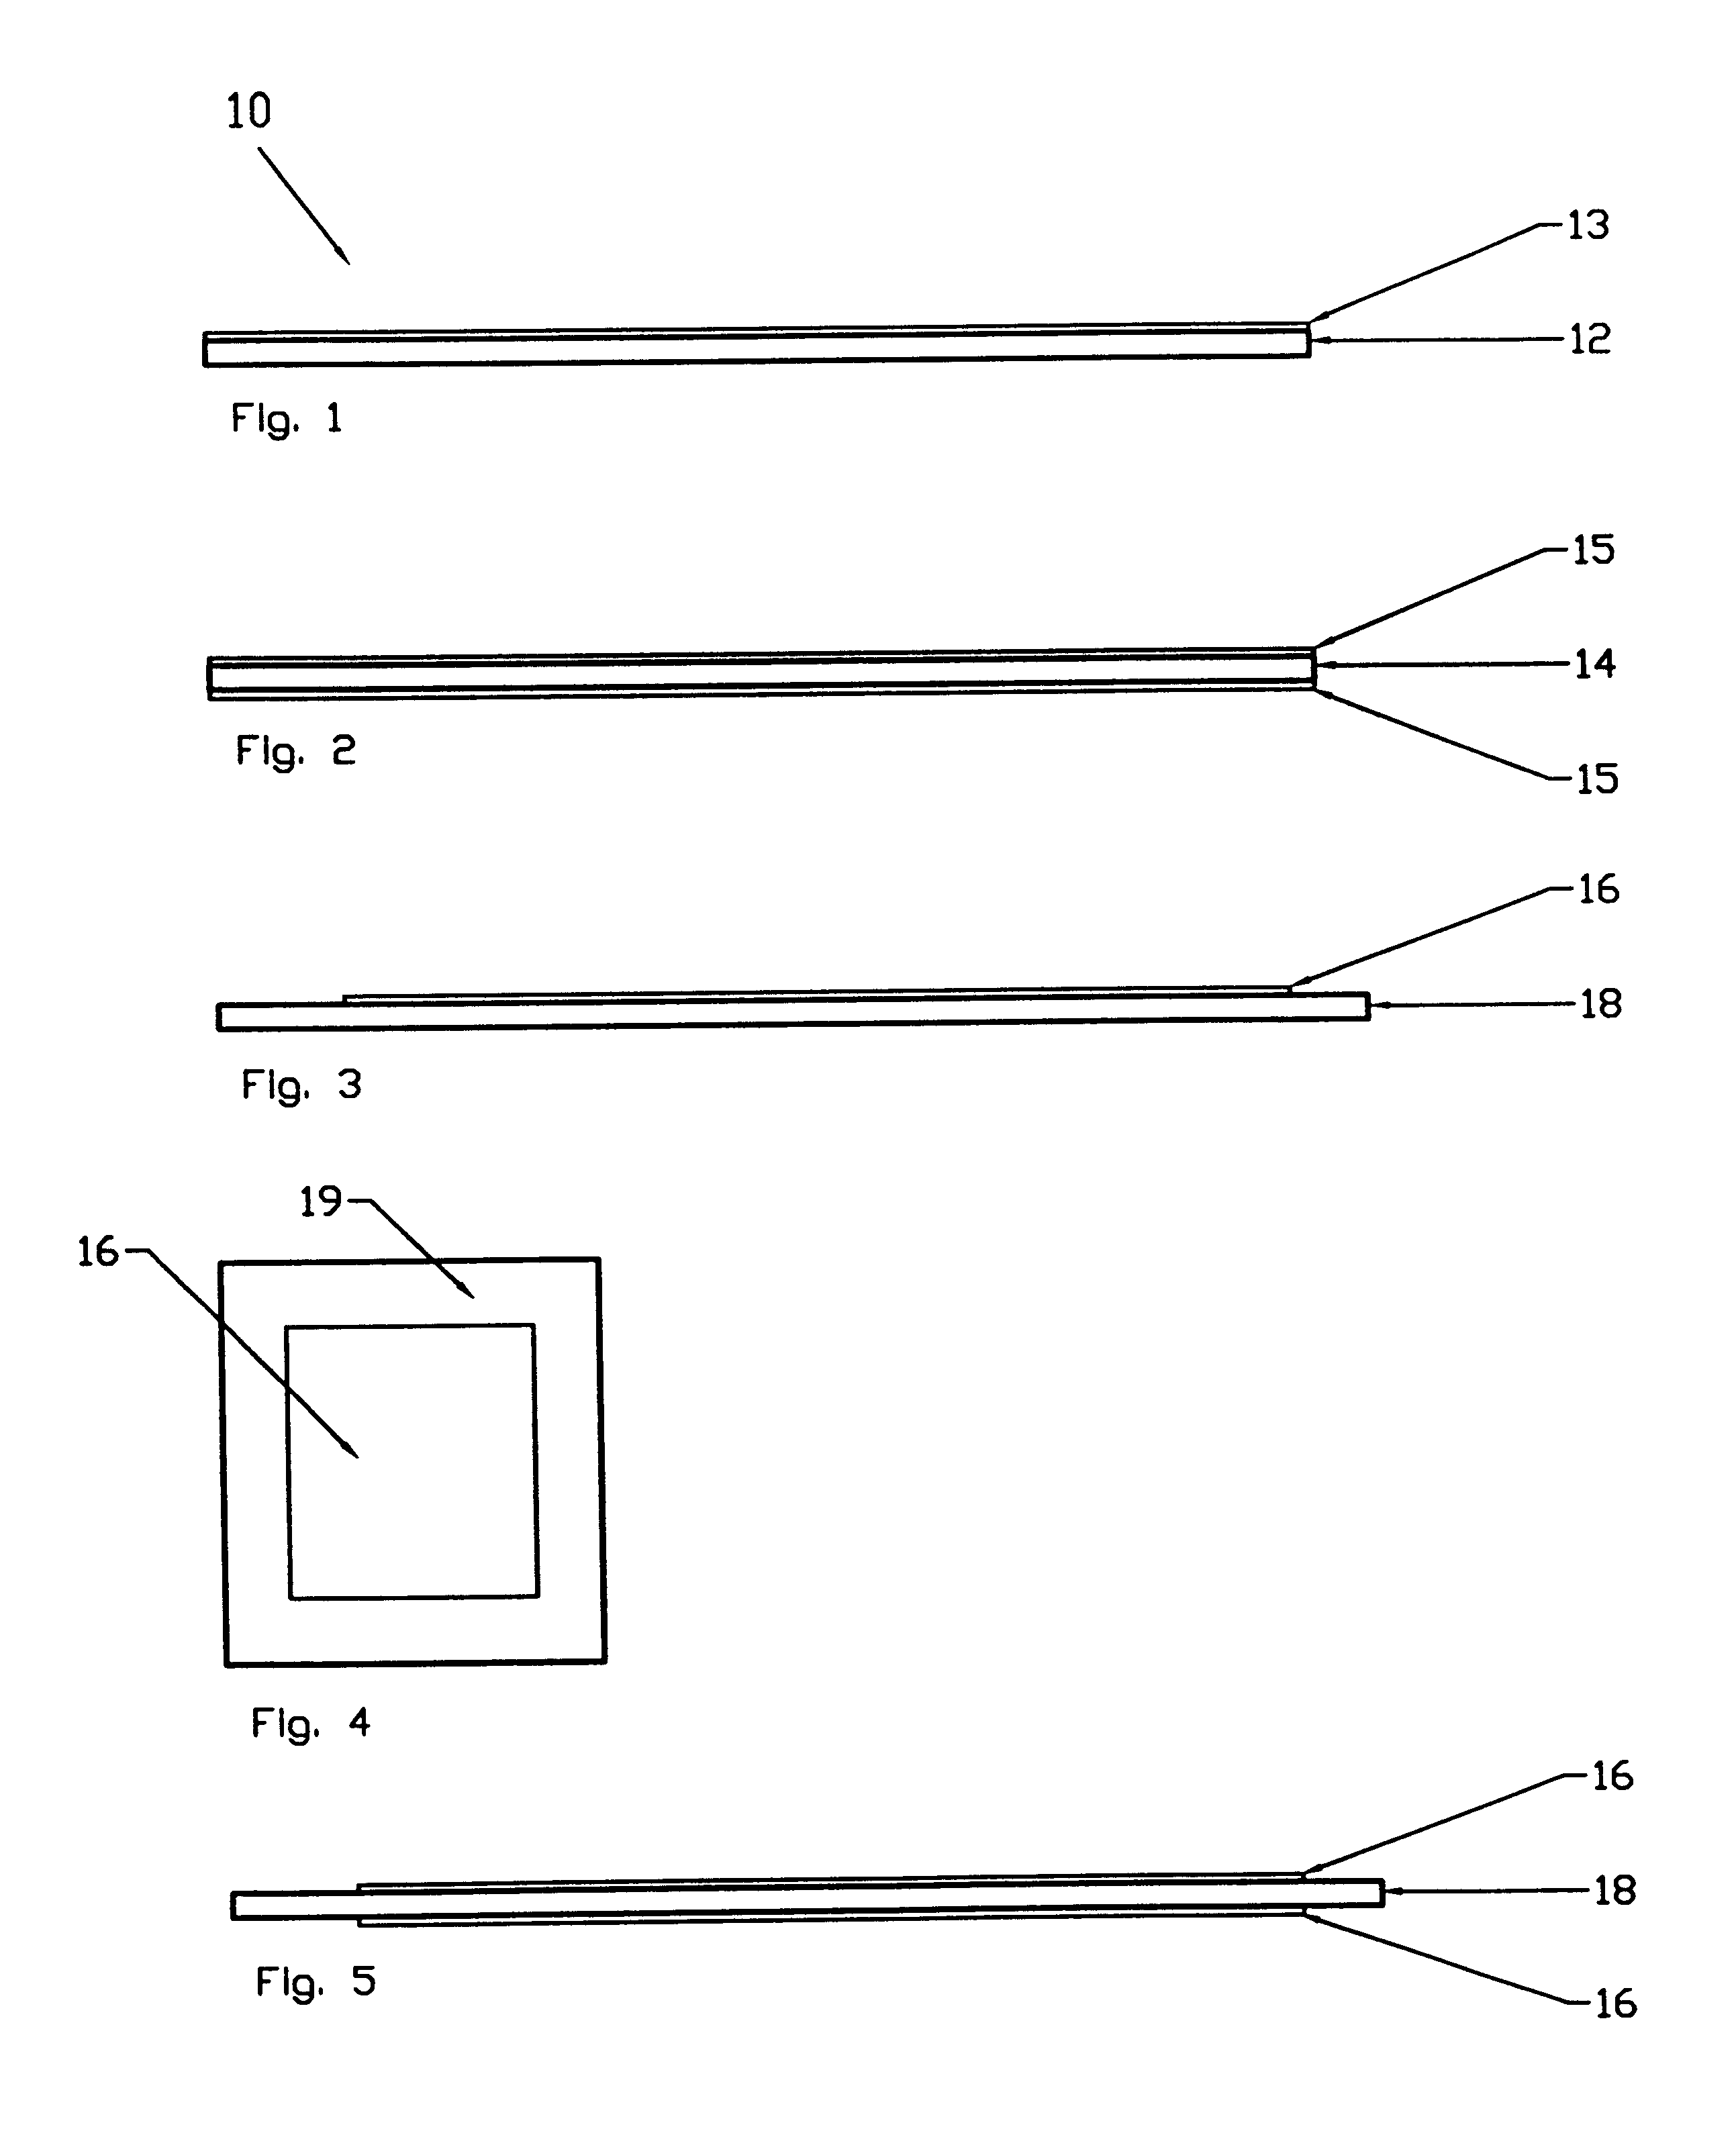 Multi-layer structure and method for forming a thermal interface with low contact resistance between a microelectronic component package and heat sink